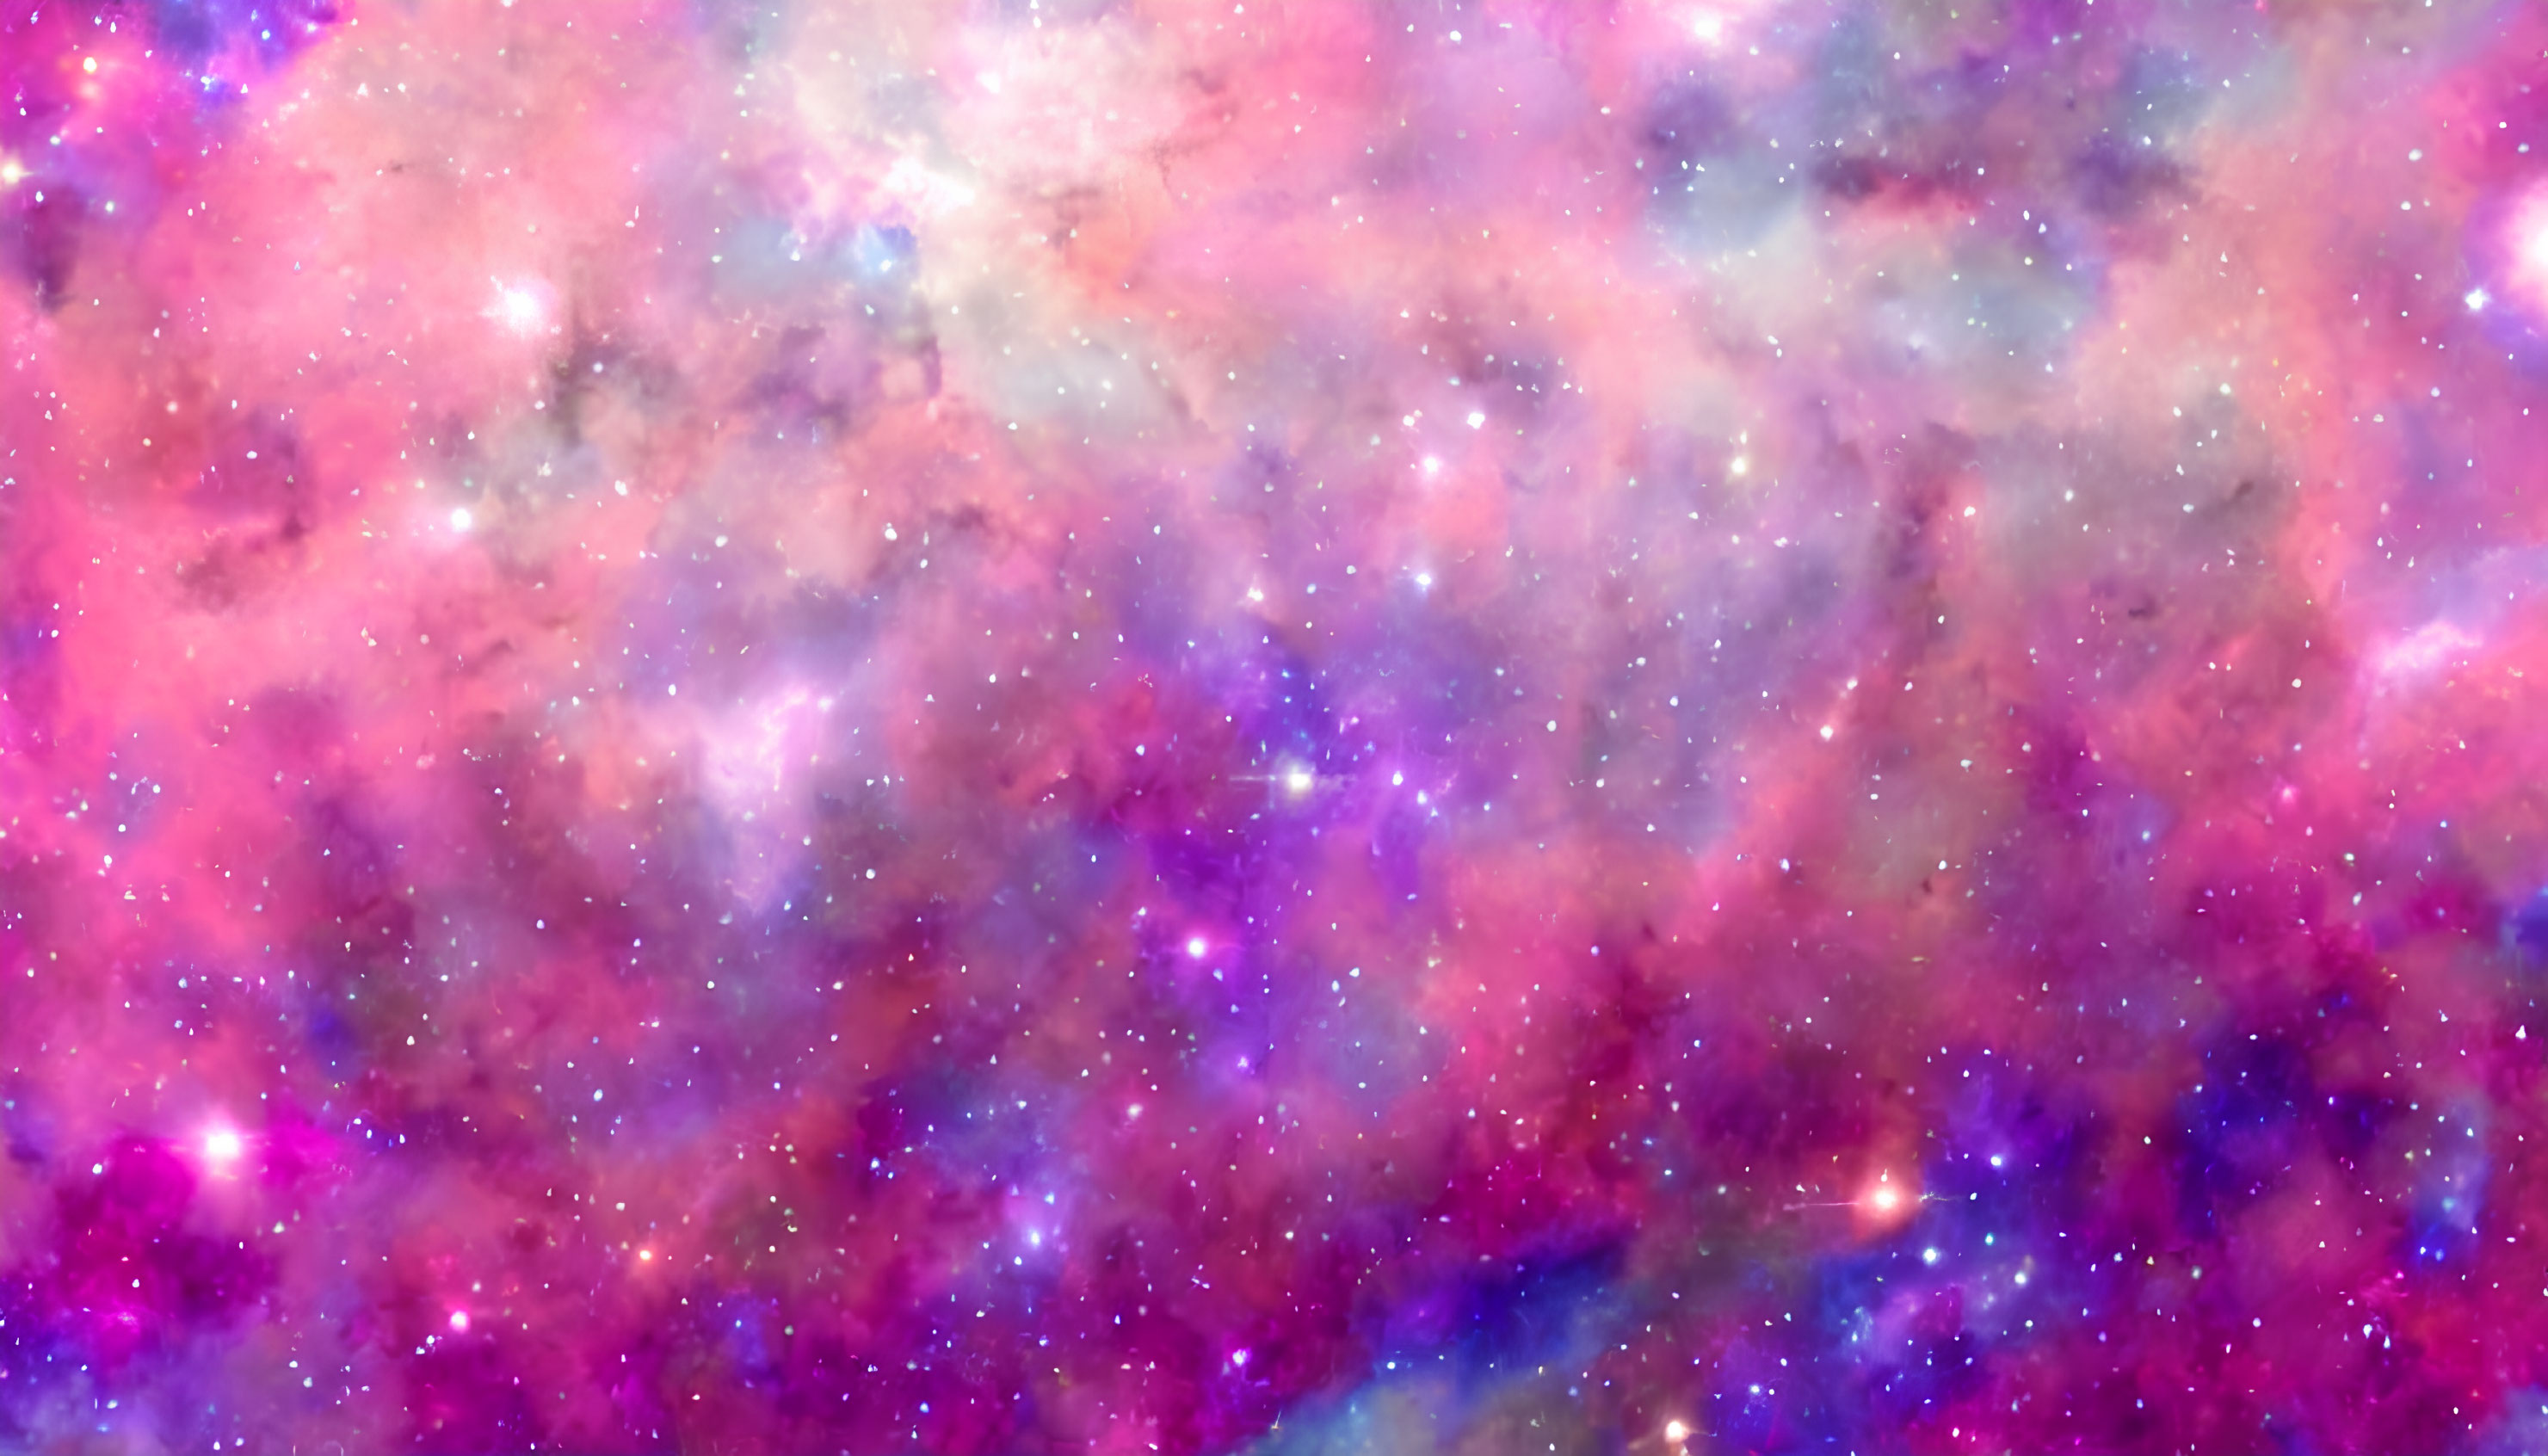 Colorful Pink, Blue, and Purple Nebula with Stars and Cosmic Dust